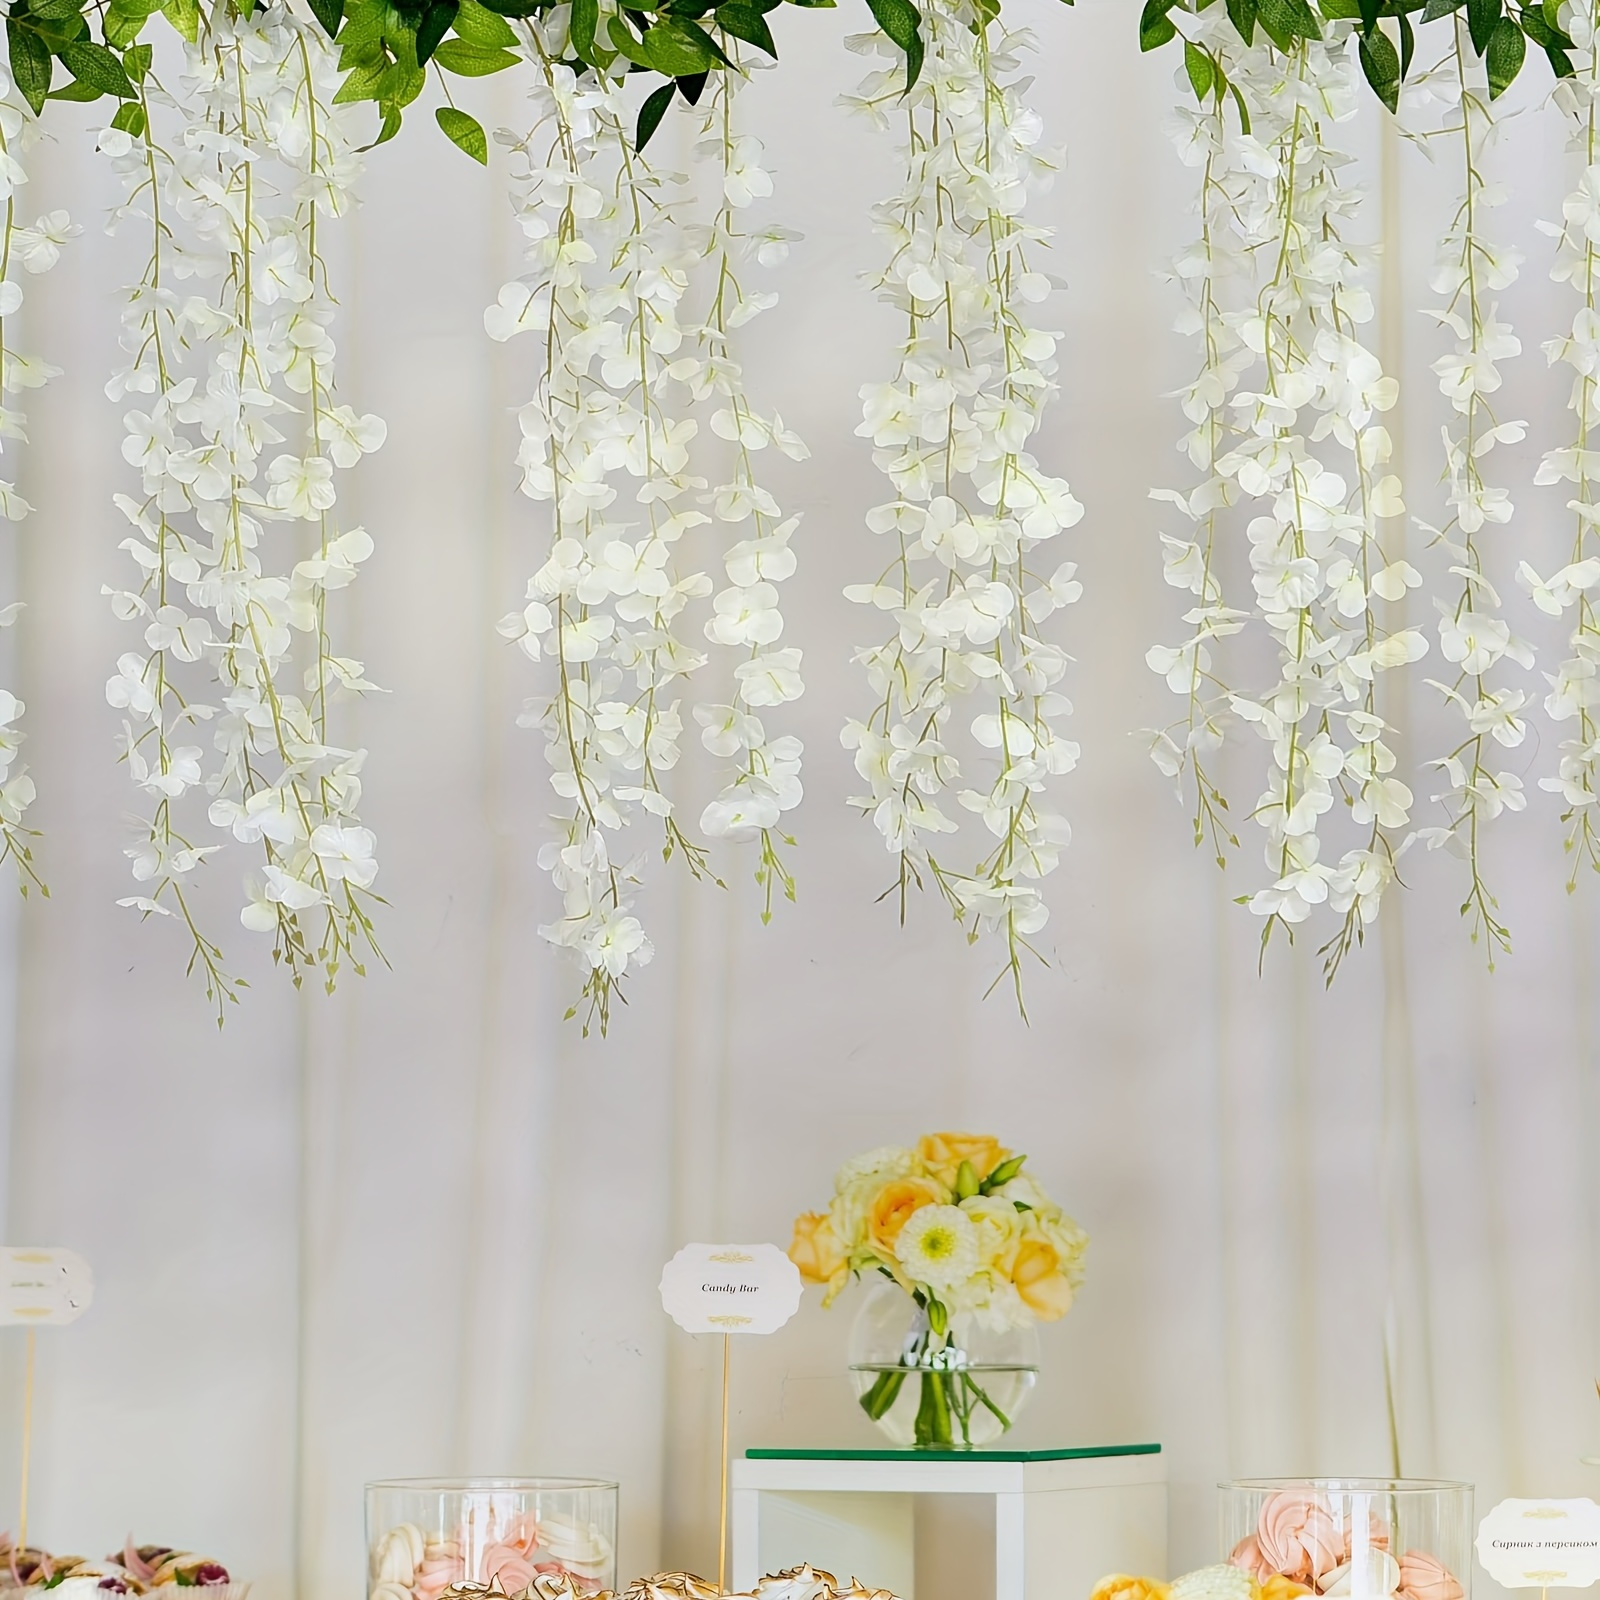 

charming" Elegant White Silk Wisteria Garland - 16 Branches Artificial Hanging Flowers For Wedding, Party, Garden Decor & Easter Gift